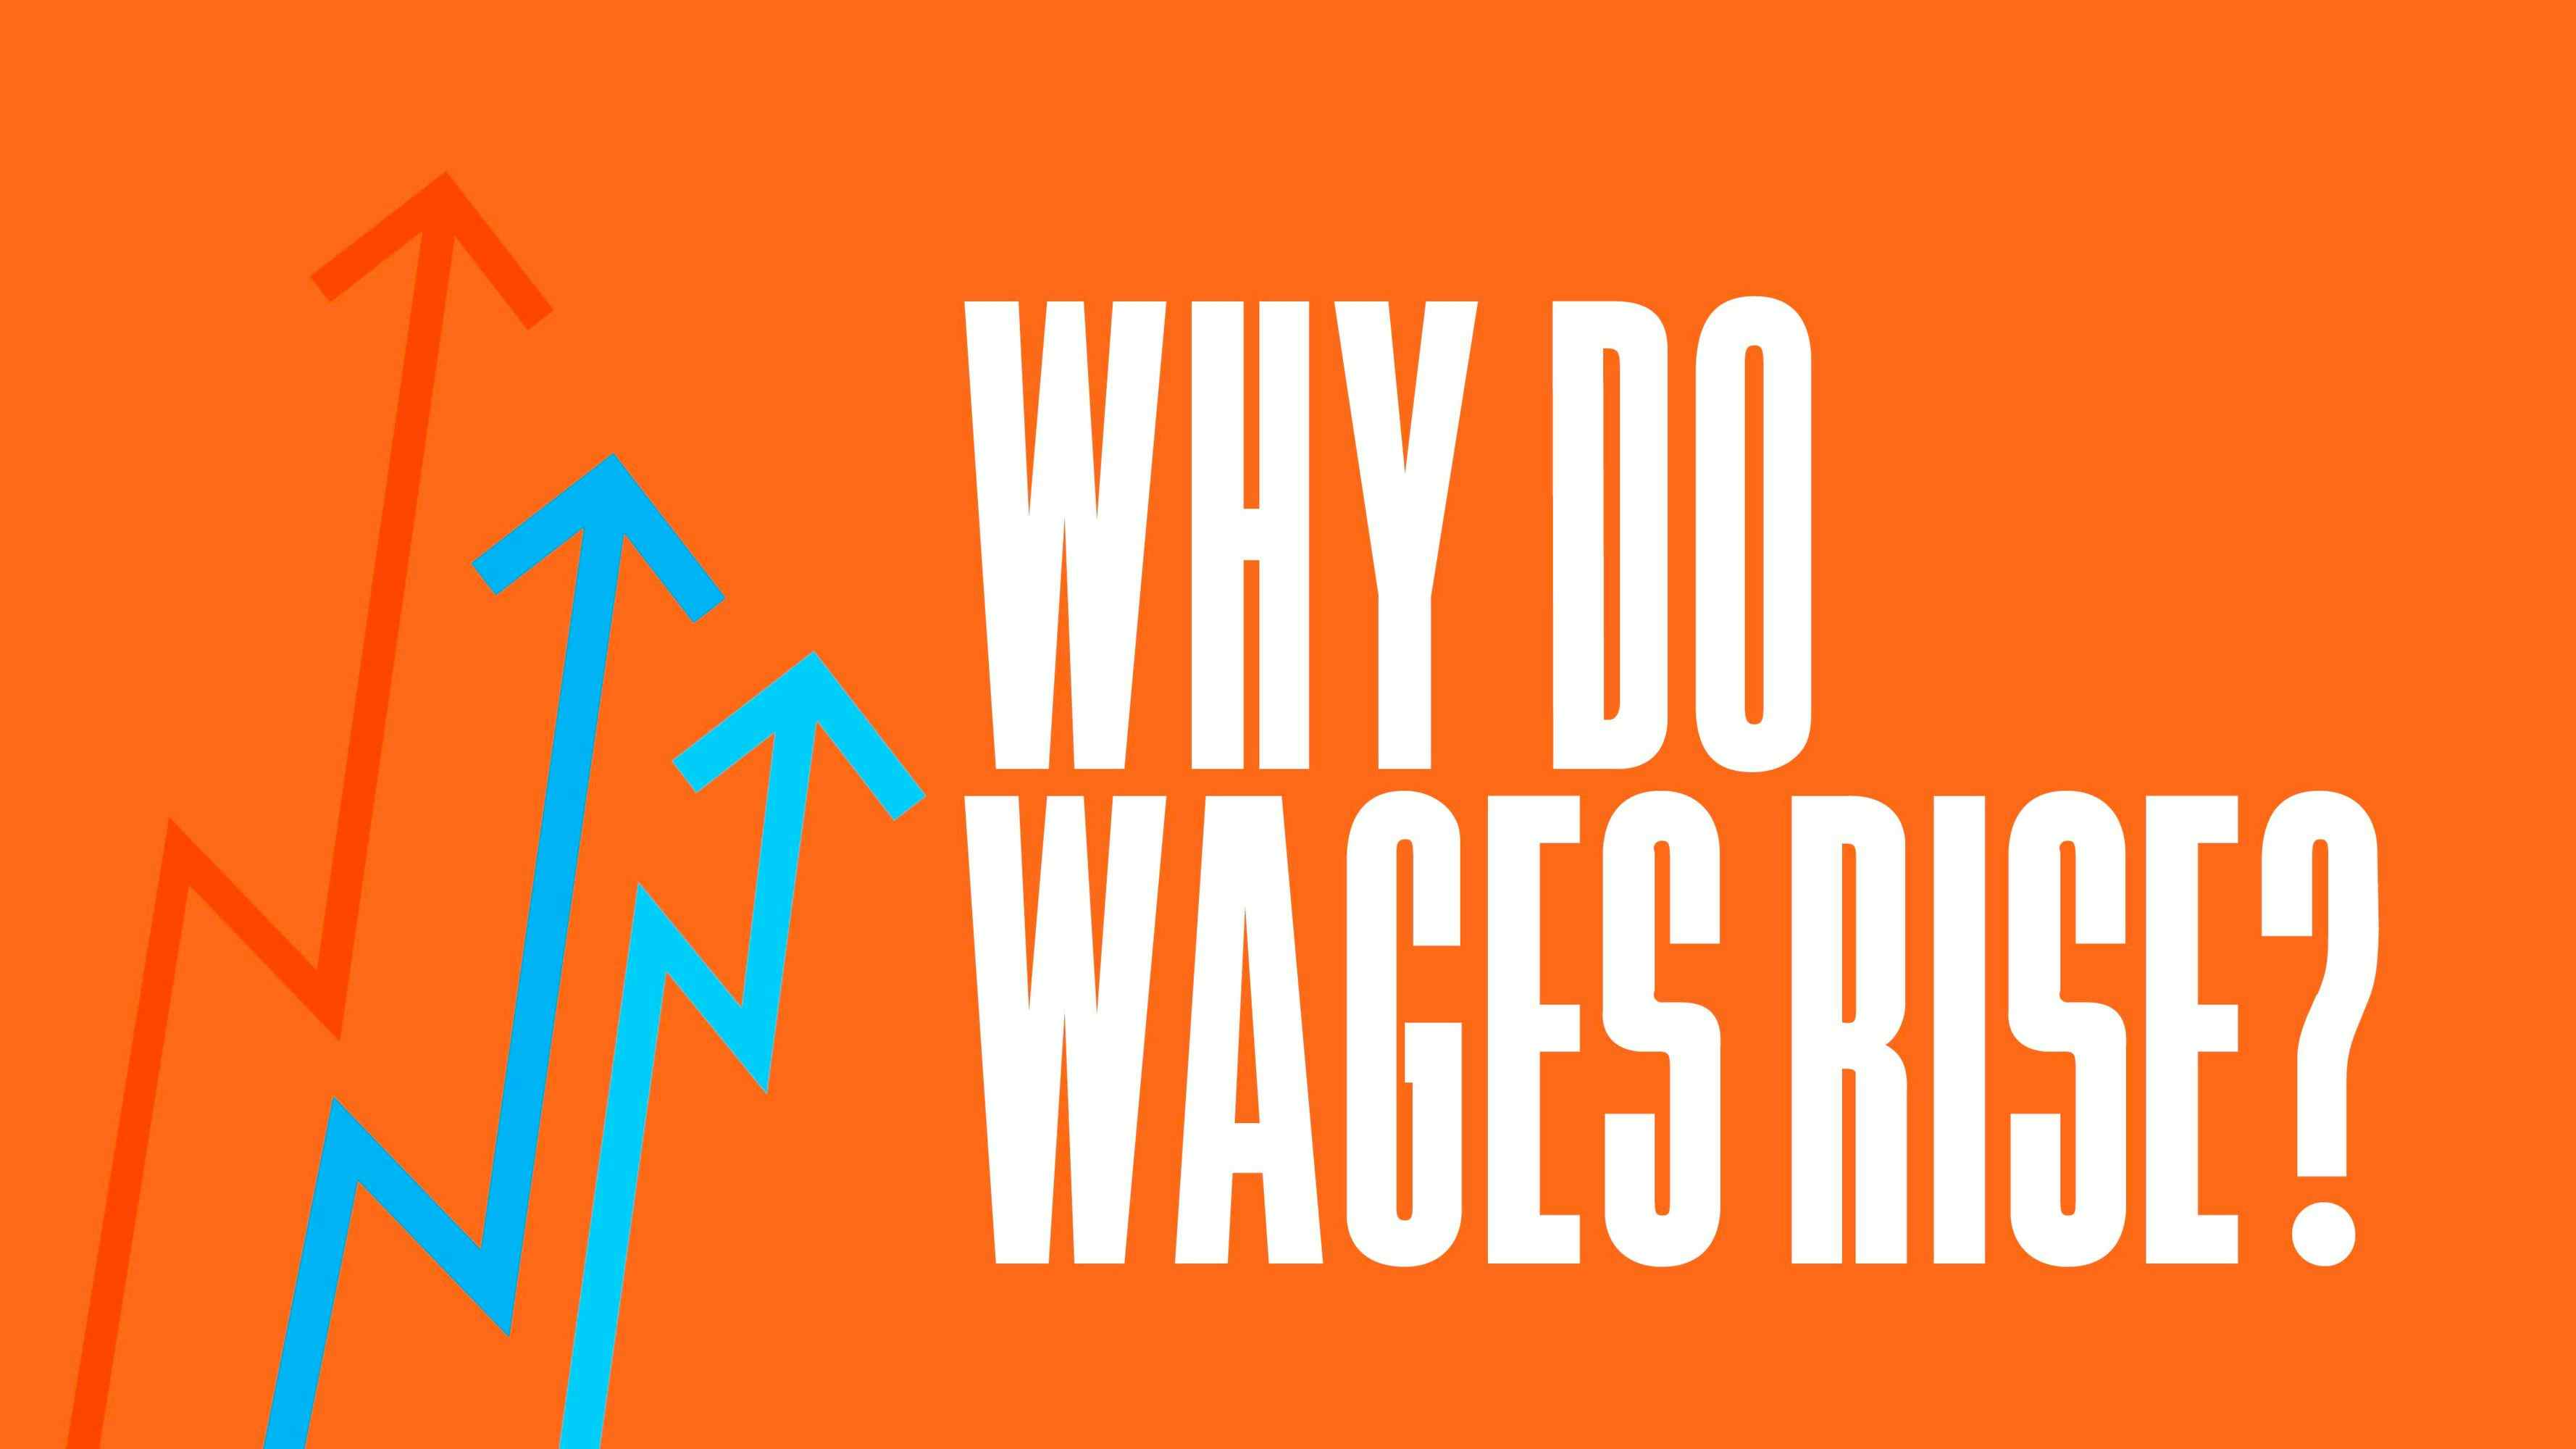 Why Do Wages Rise?